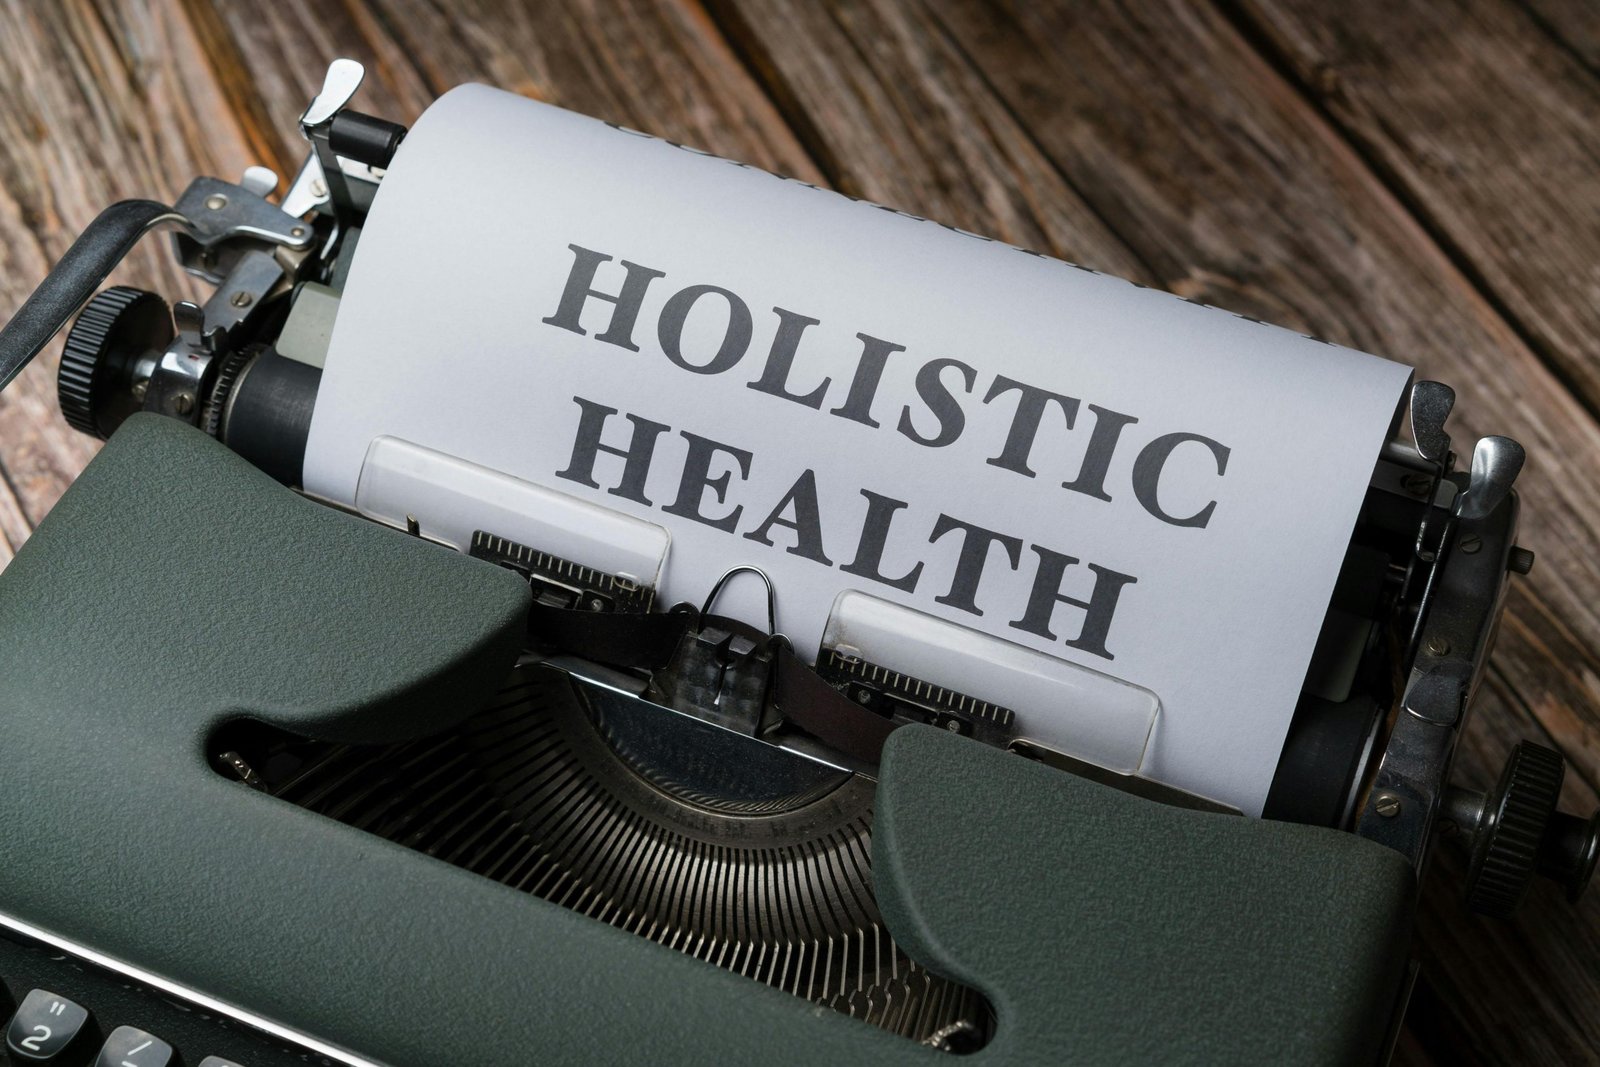 A typewriter with the word holistic health on it